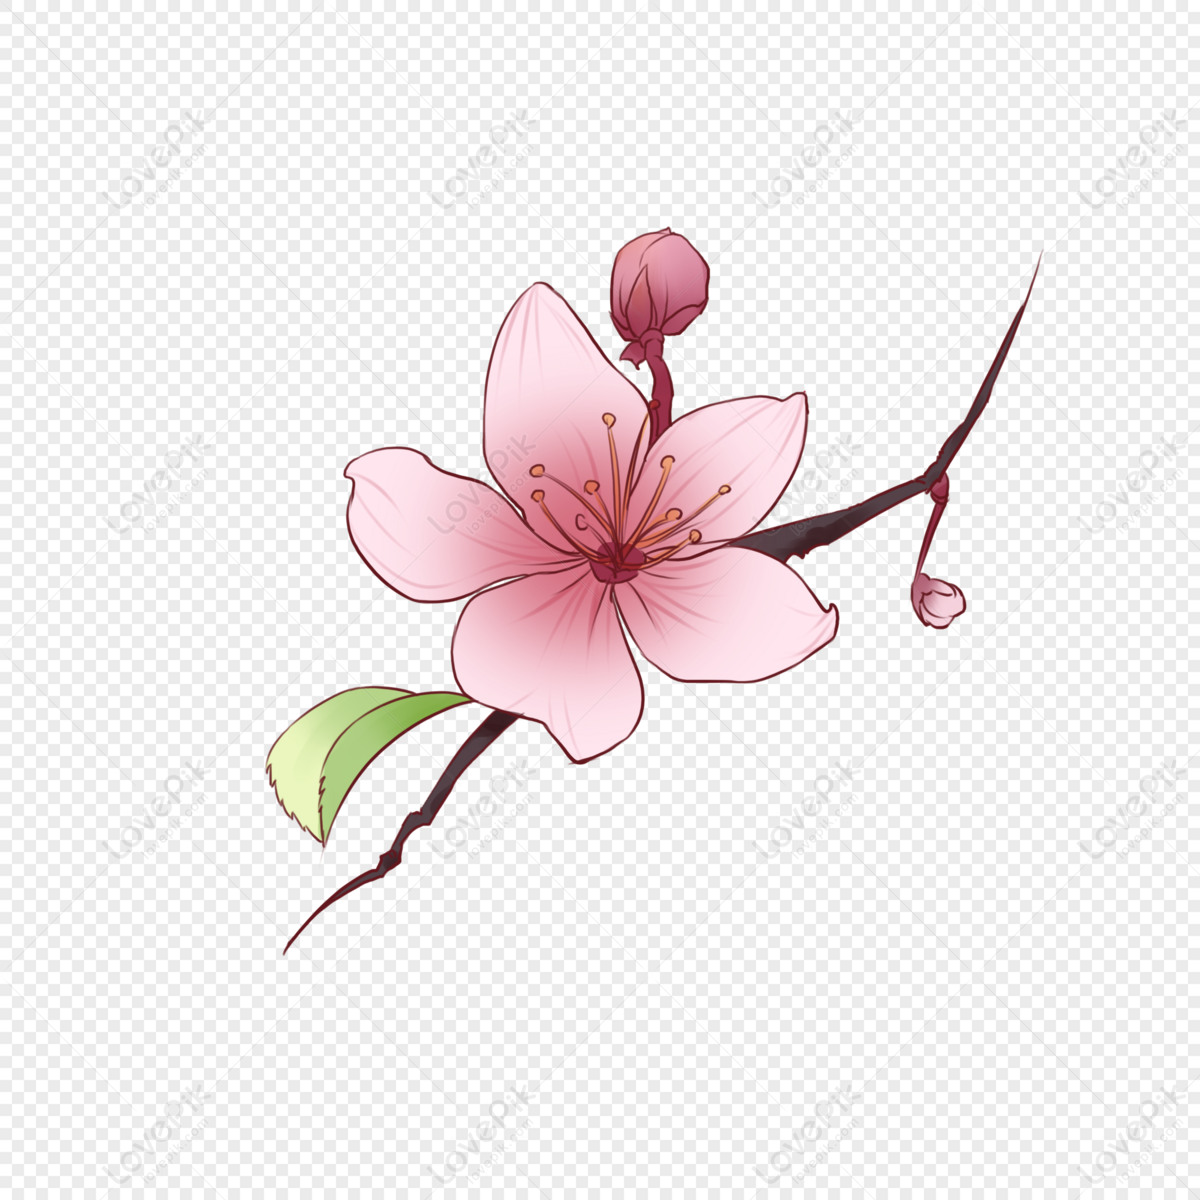 A Peach Blossom Free PNG And Clipart Image For Free Download ...